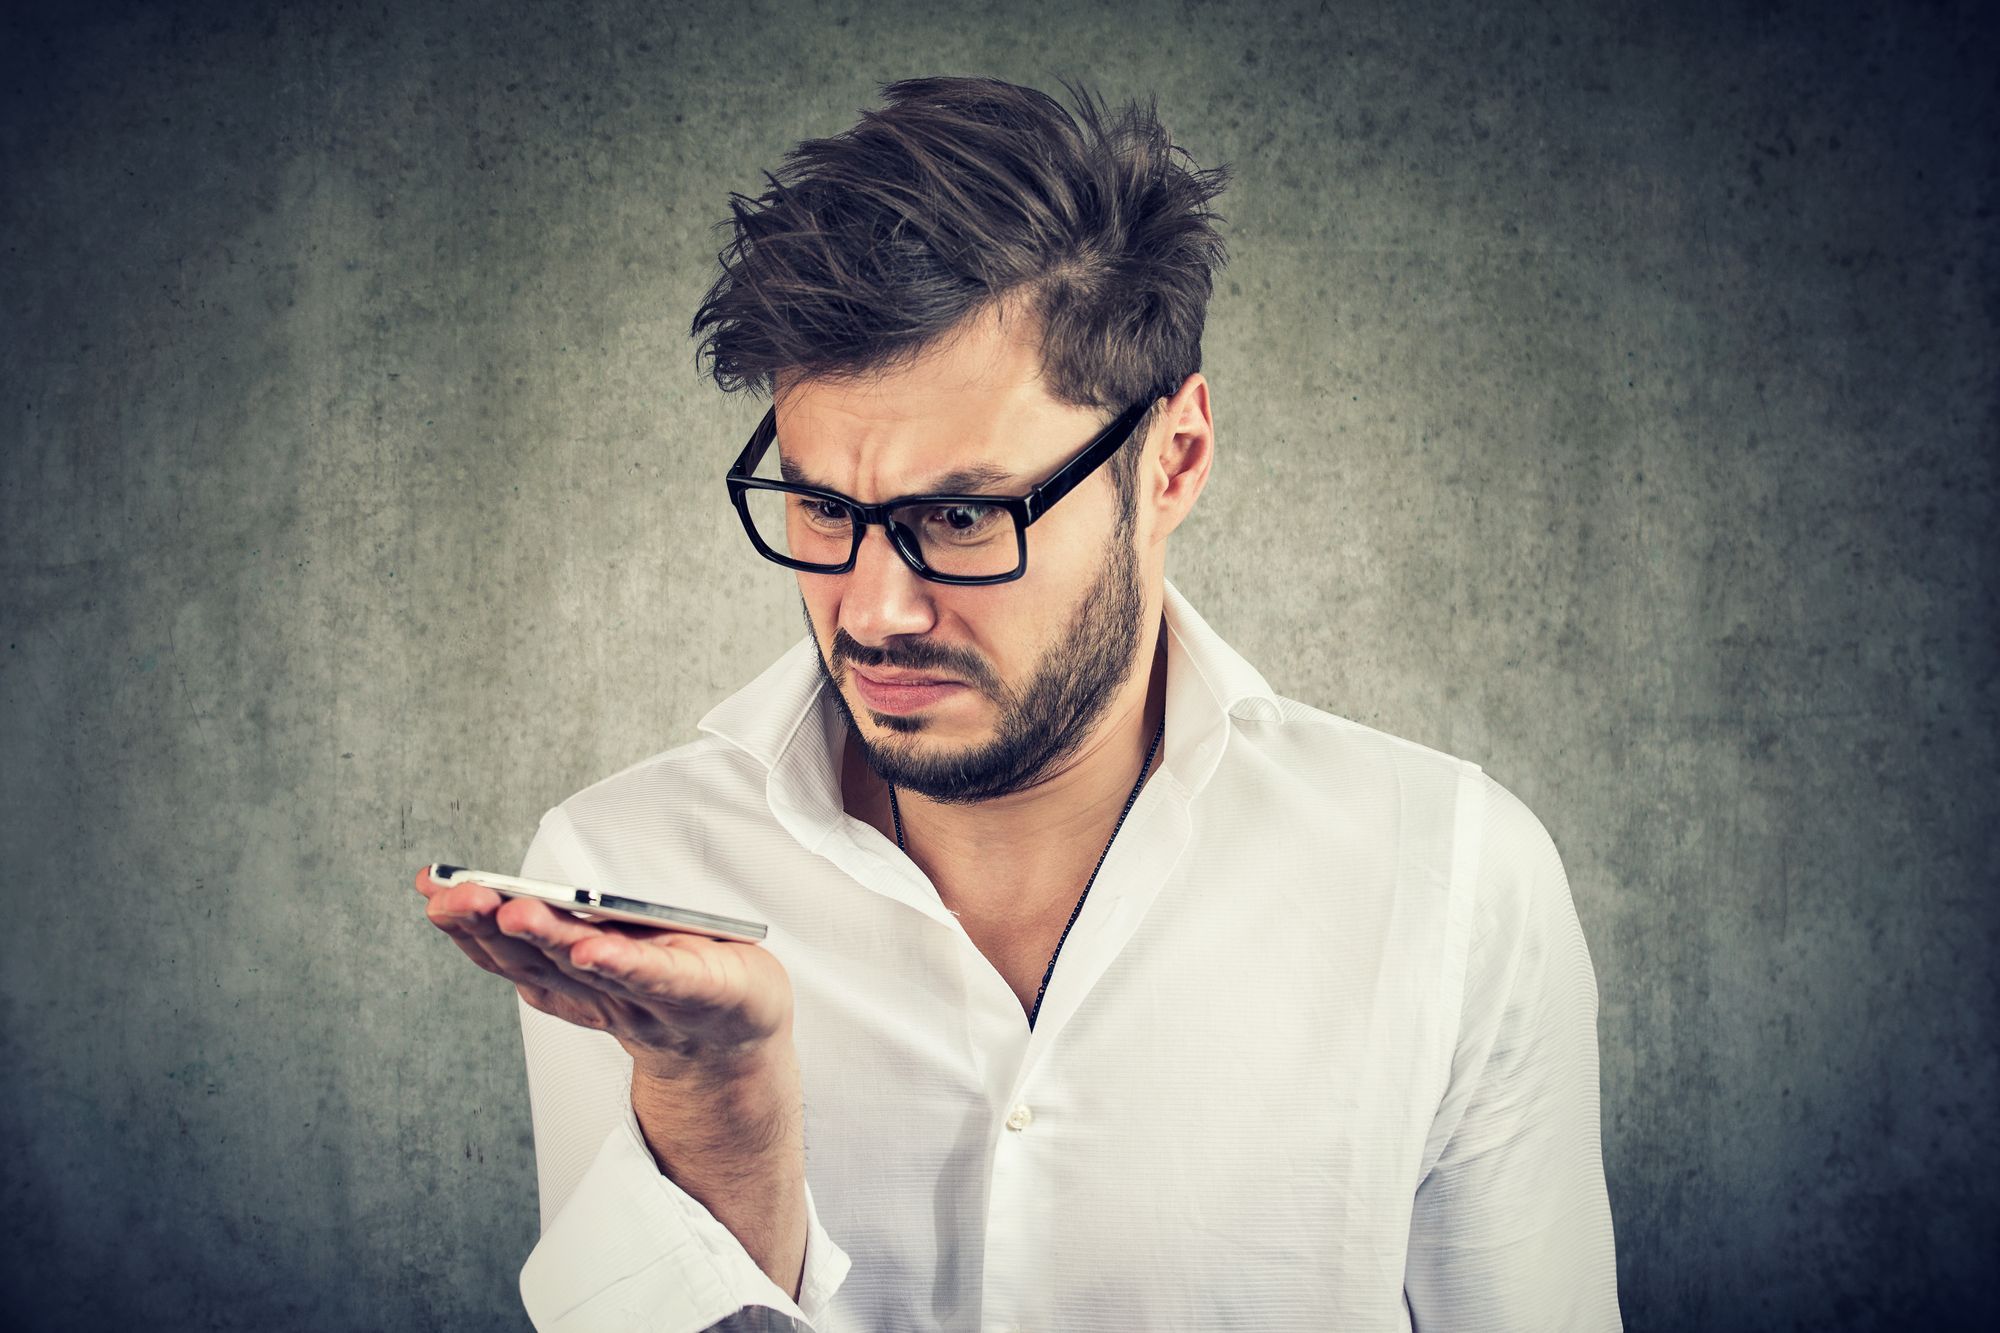 man looking at unwanted texts on phone